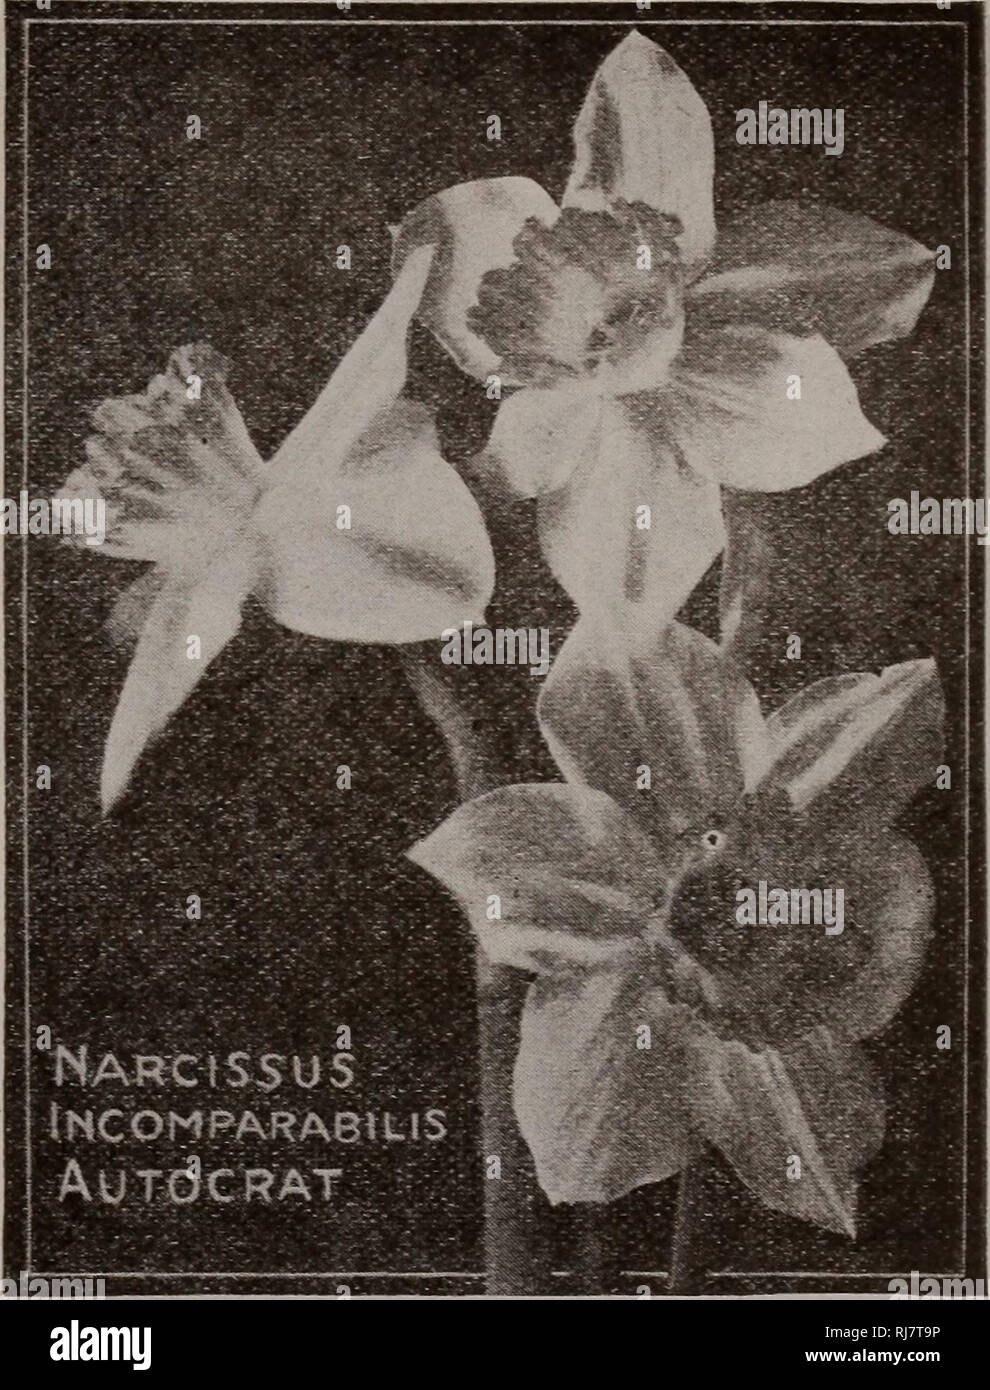 . Childs' fall bulbs that bloom plants that please berries that bear. Commercial catalogs Seeds; Nurseries (Horticulture) Catalogs; Vegetables Seeds Catalogs; Bulbs (Plants) Seeds Catalogs; Seeds Catalogs; Flowers Catalogs; John Lewis Childs (Firm); Commercial catalogs; Nurseries (Horticulture); Vegetables; Bulbs (Plants); Seeds; Flowers. The Single Narcissus are perhaps the most-beautiful of all and we are pleased to be able to oiler them this year at a low price. The following- varieties are the Attest of their class. LONG TRUMPETS OR AJAX Varieties belonging- to this division have very larg Stock Photo